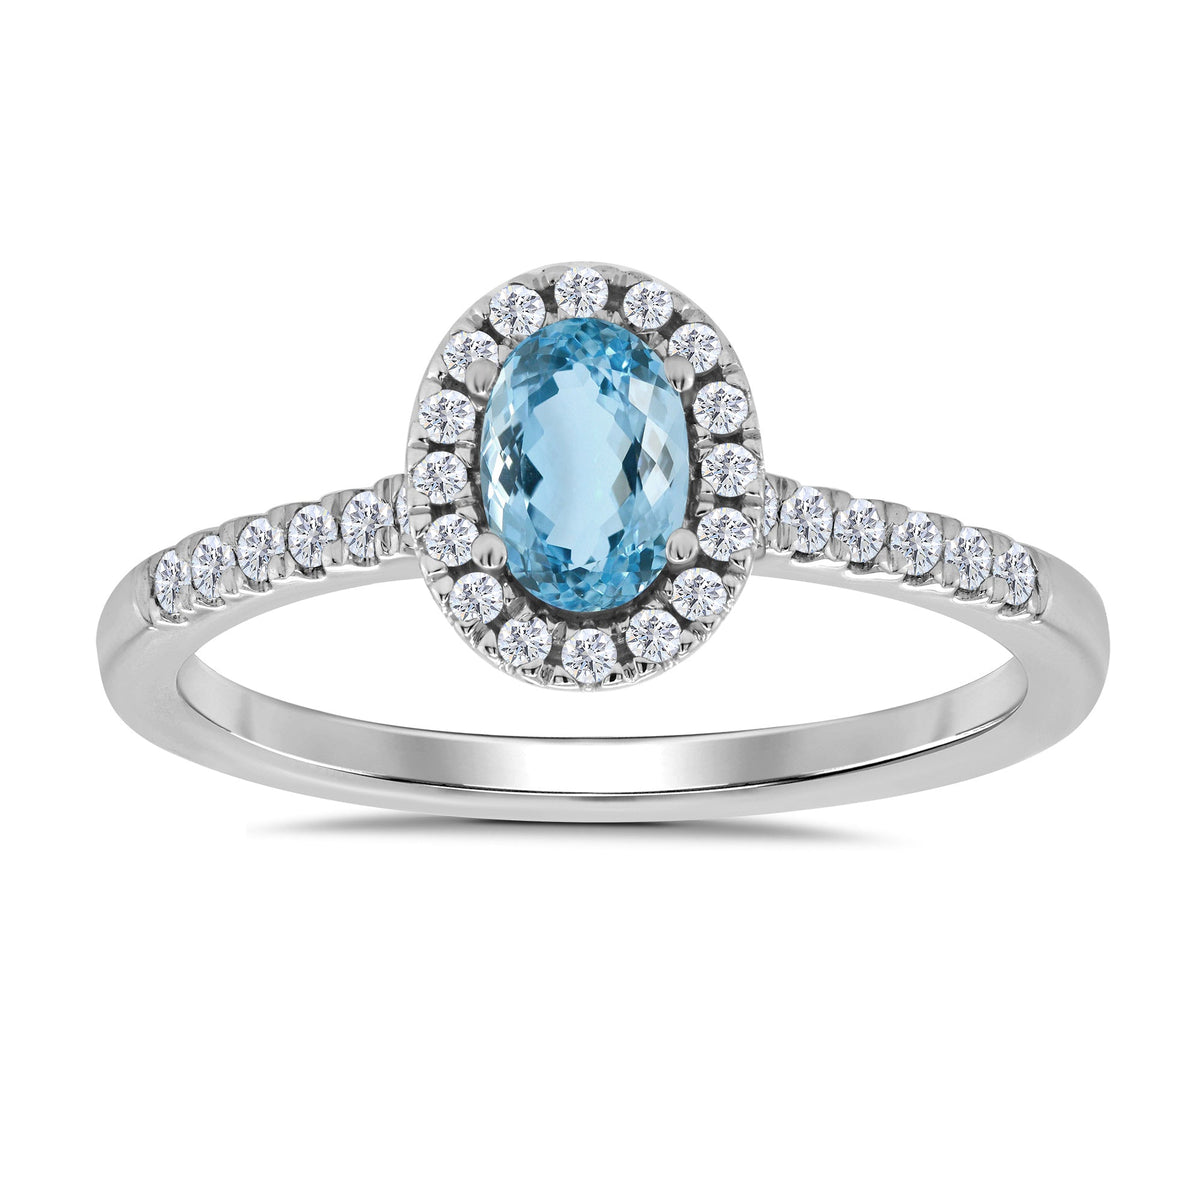 9ct white gold 6x4mm oval aquamarine &amp; diamond cluster ring with diamond shoulders 0.20ct